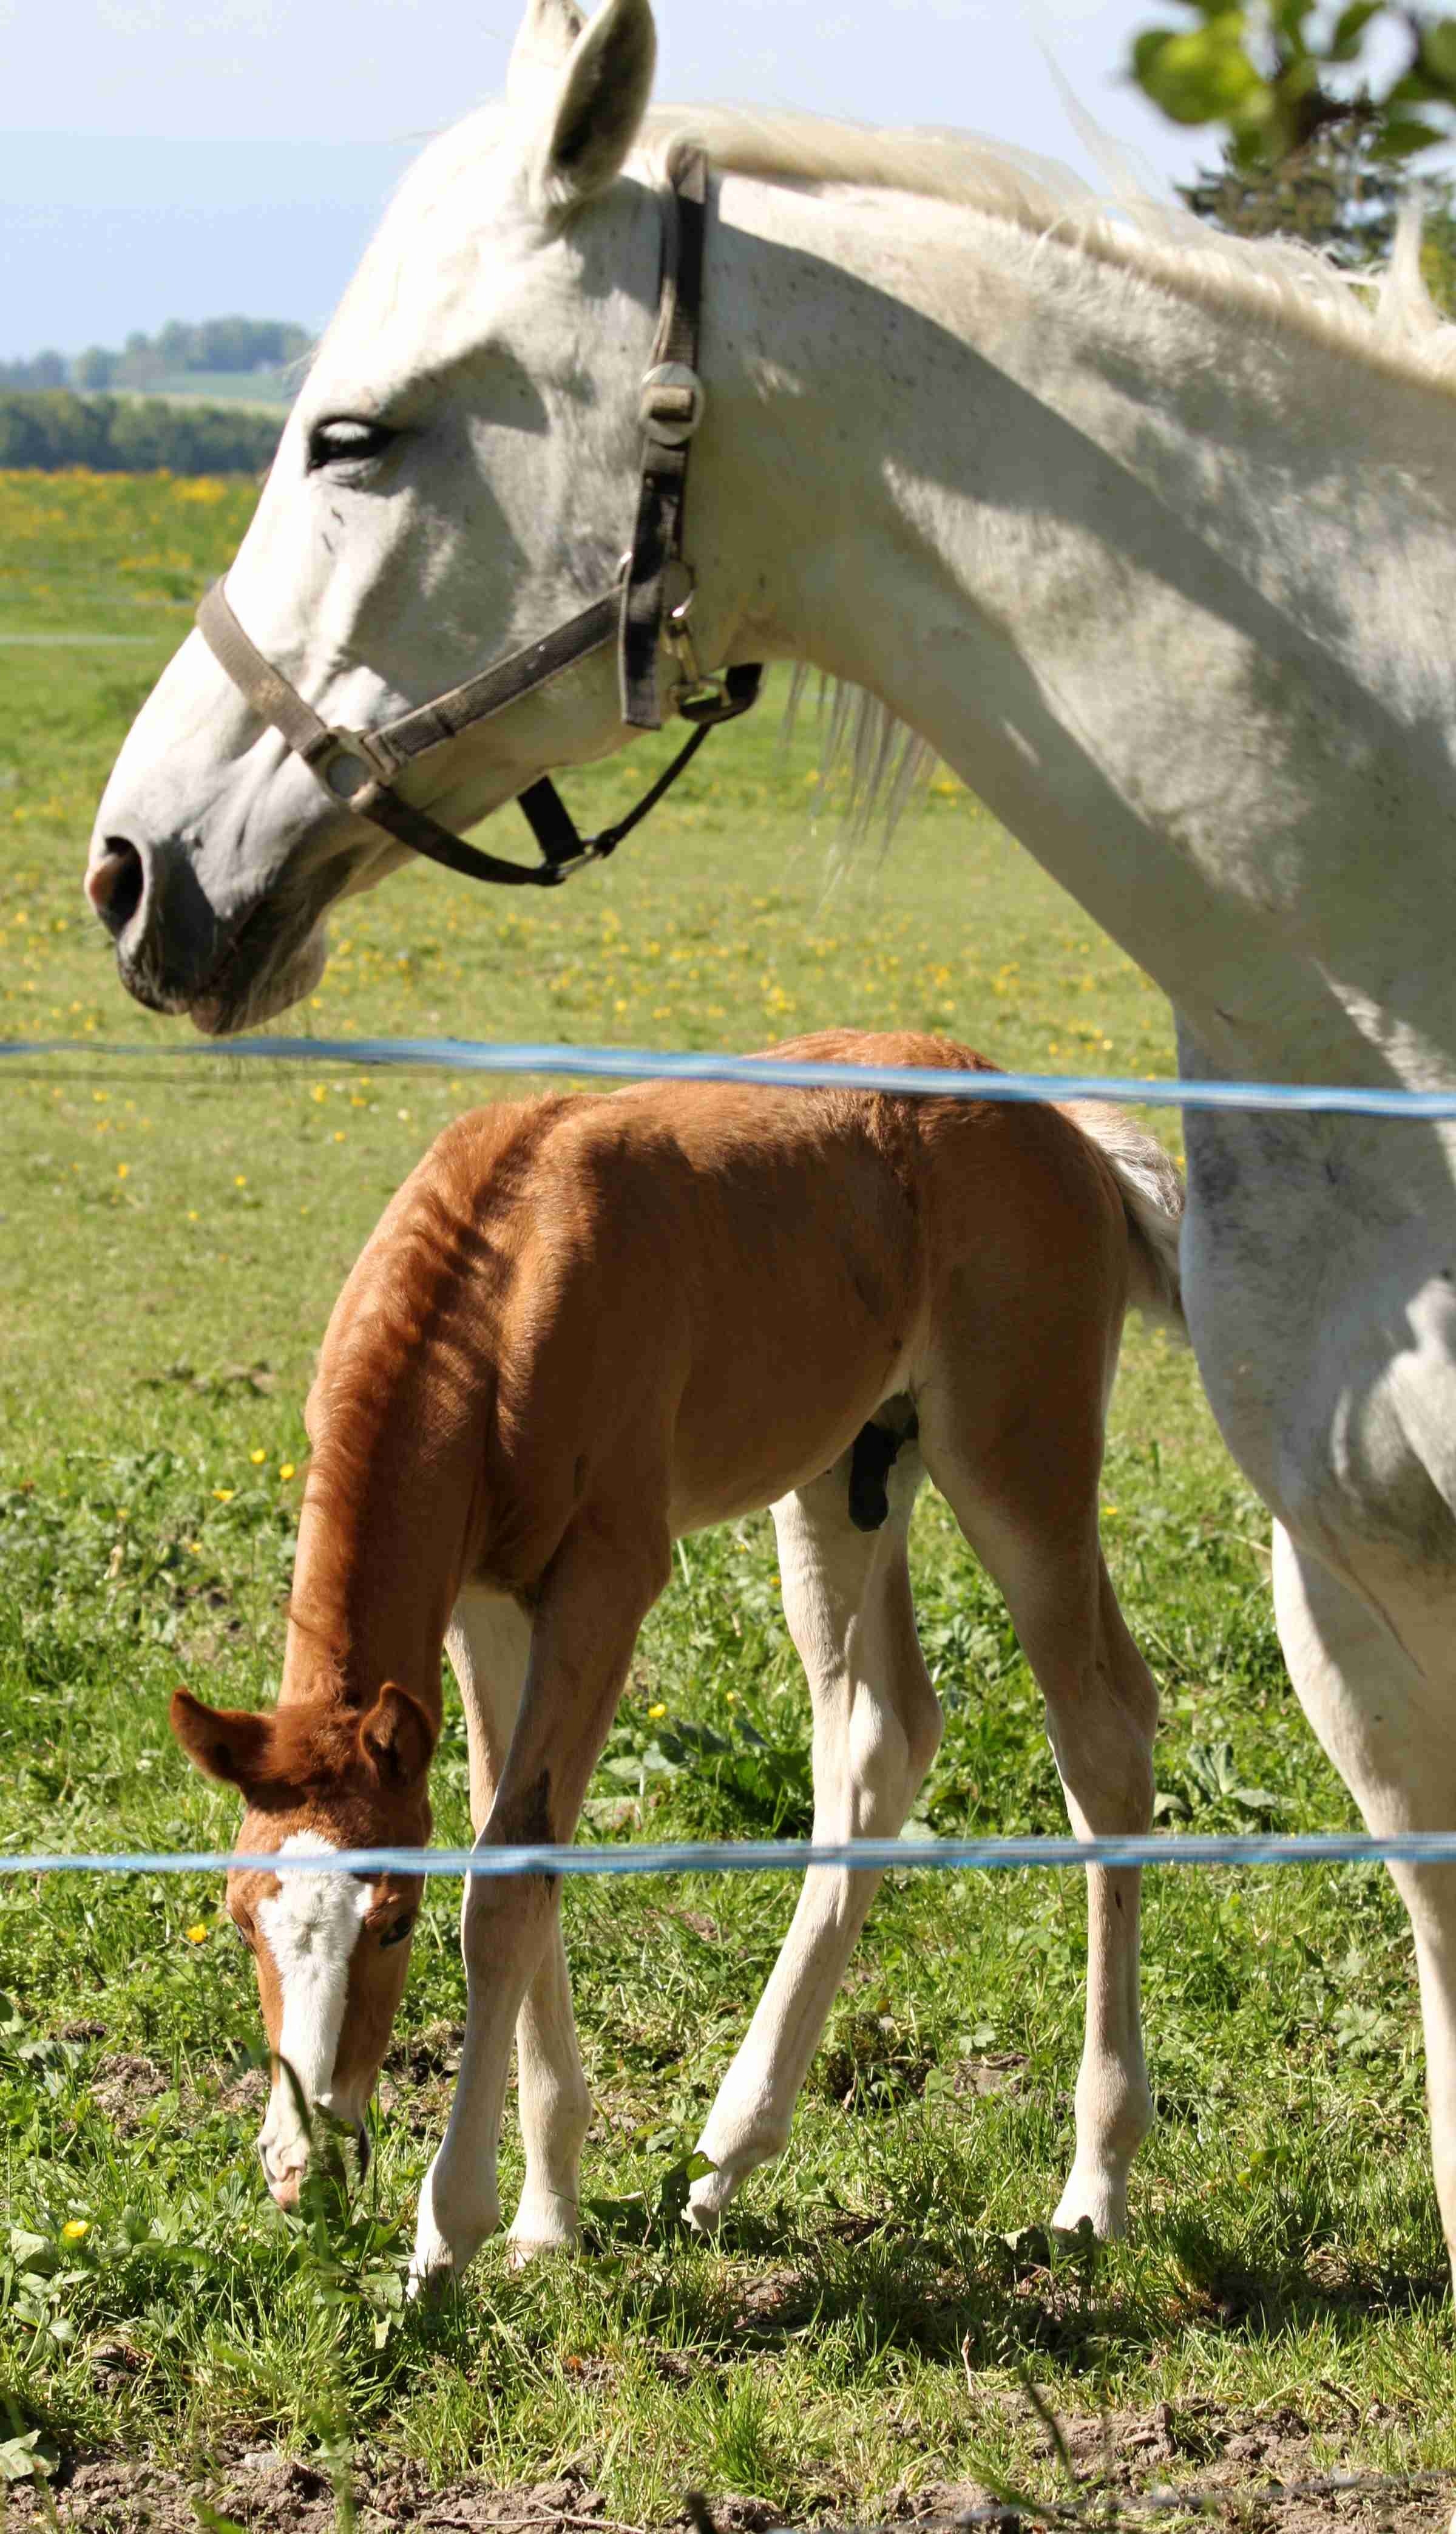 white horse and brown horse kid on green grass field during daytime